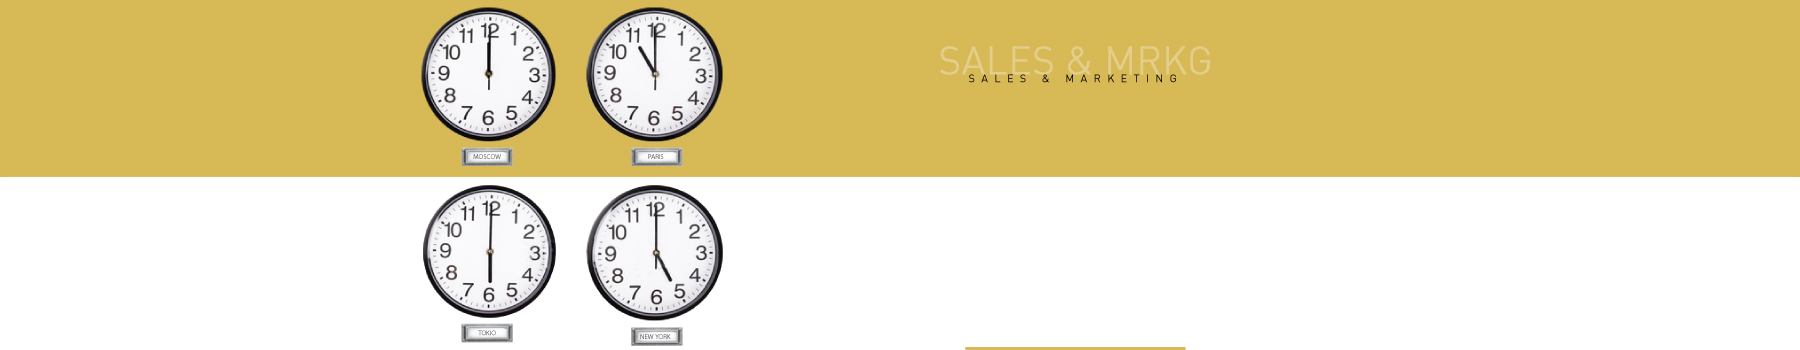 Header Marketing and Sales - Consulgroup